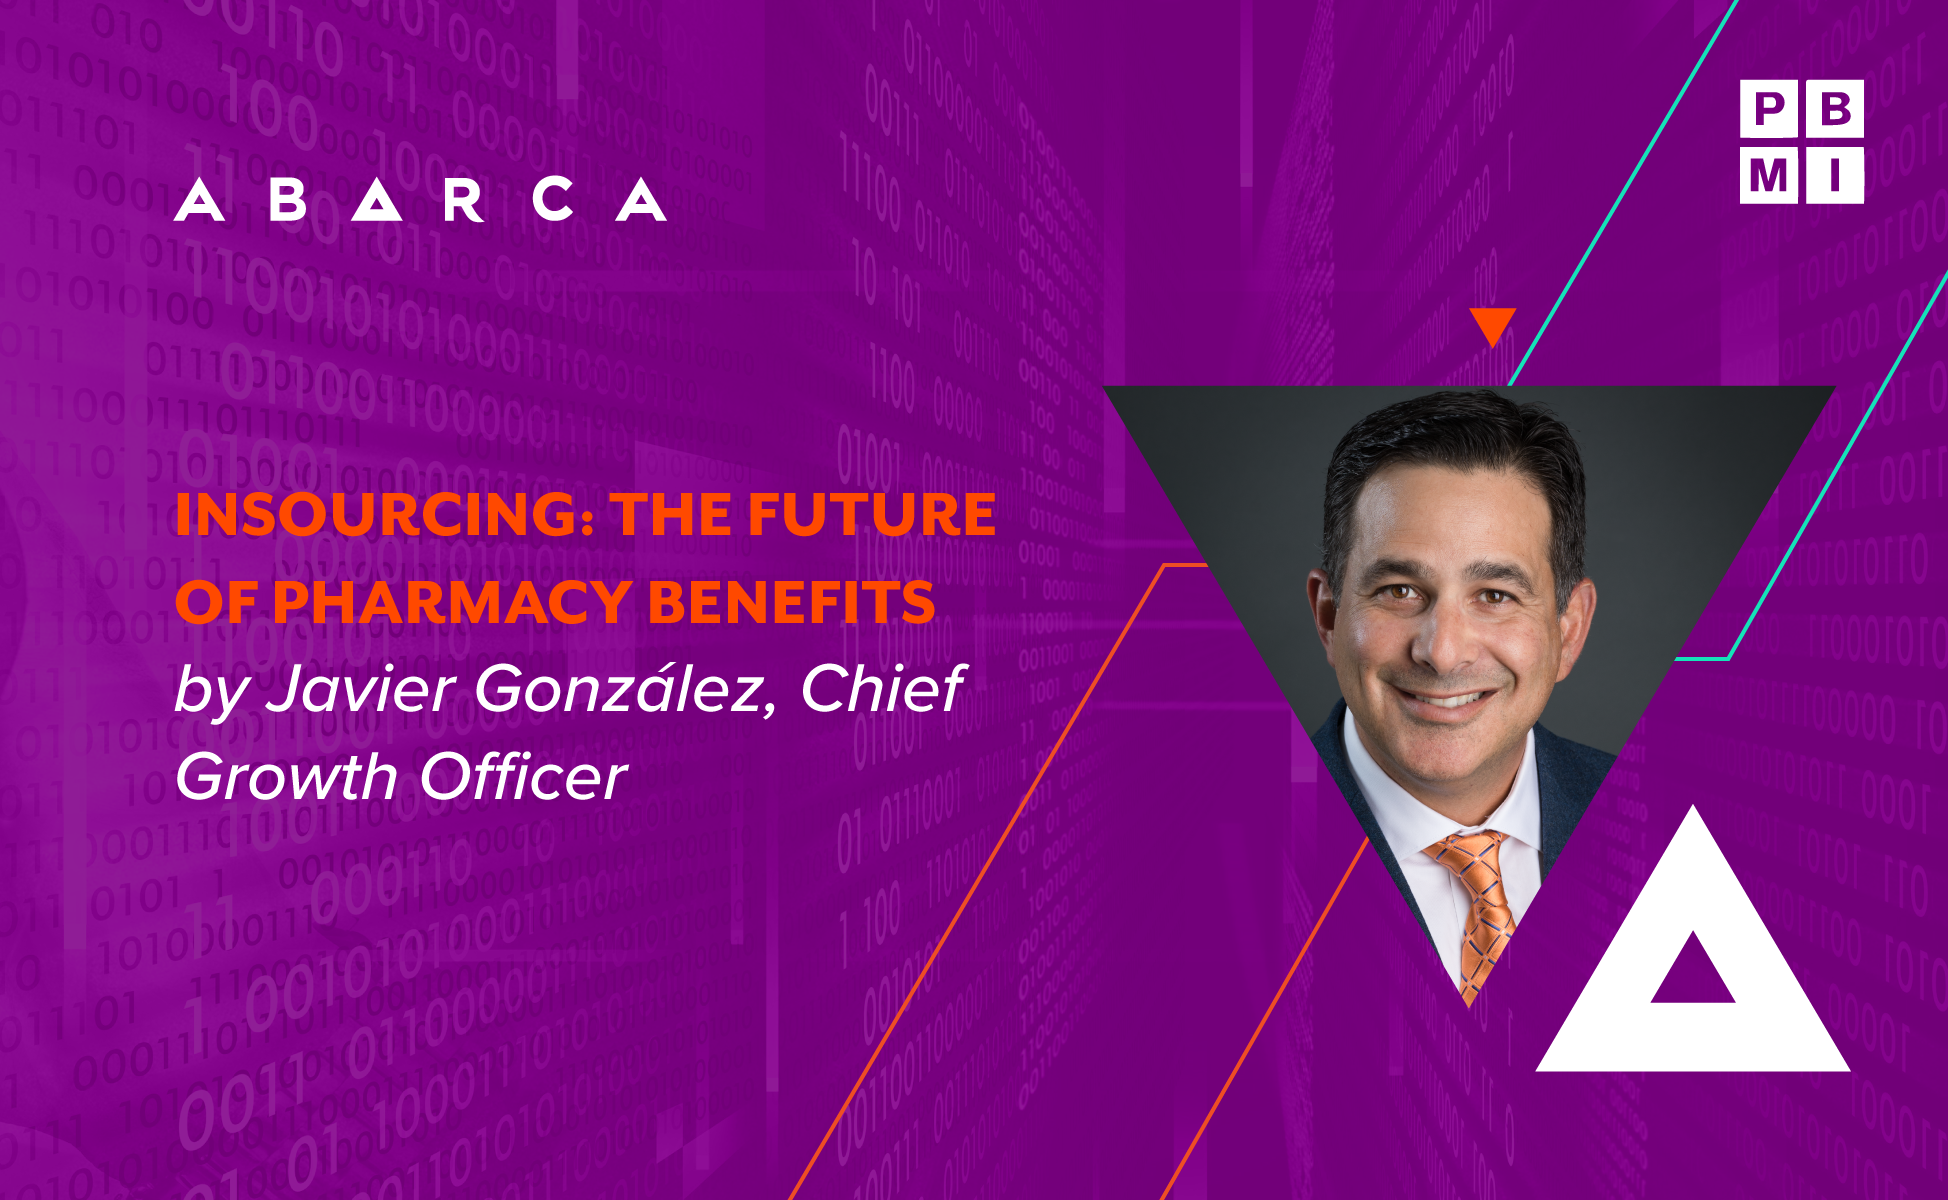 "Insourcing: The future of pharmacy benefits" with Javier González at the 2021 PBMI Annual National Conference